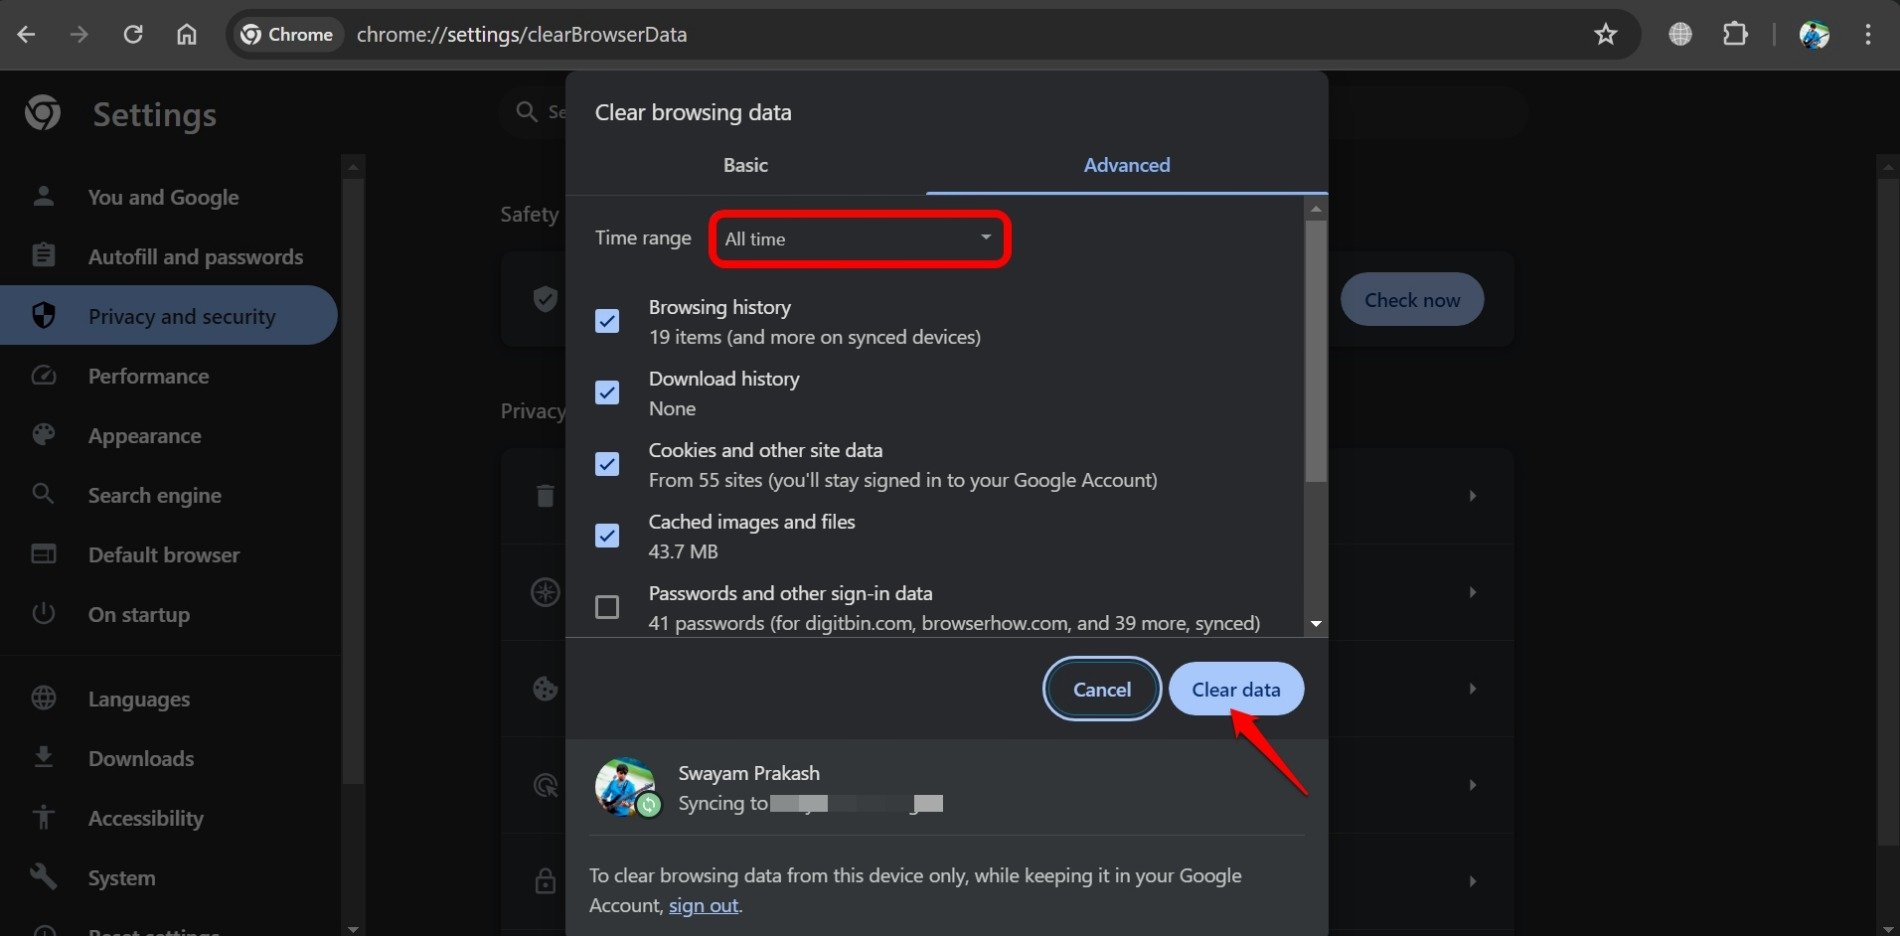 how to clear browsing data on Chrome